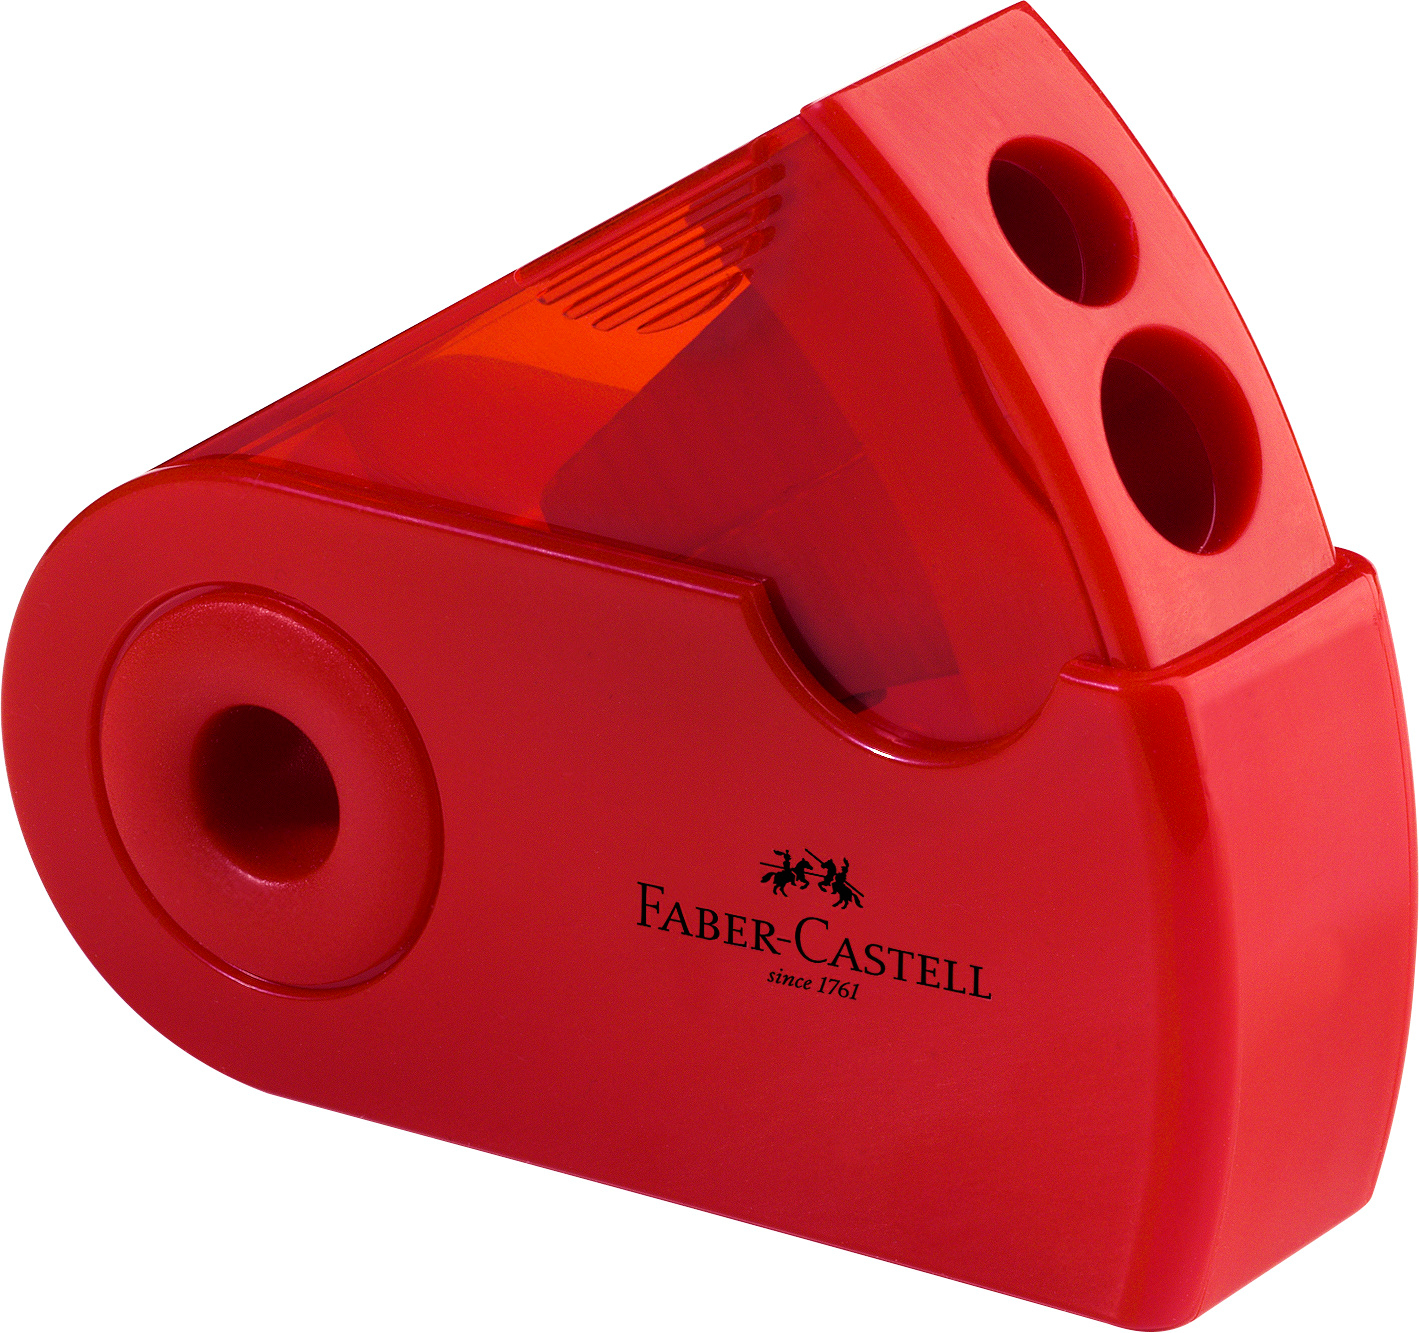 FABER-CASTELL Taille-crayon SLEEVE 182701 rouge/bleu